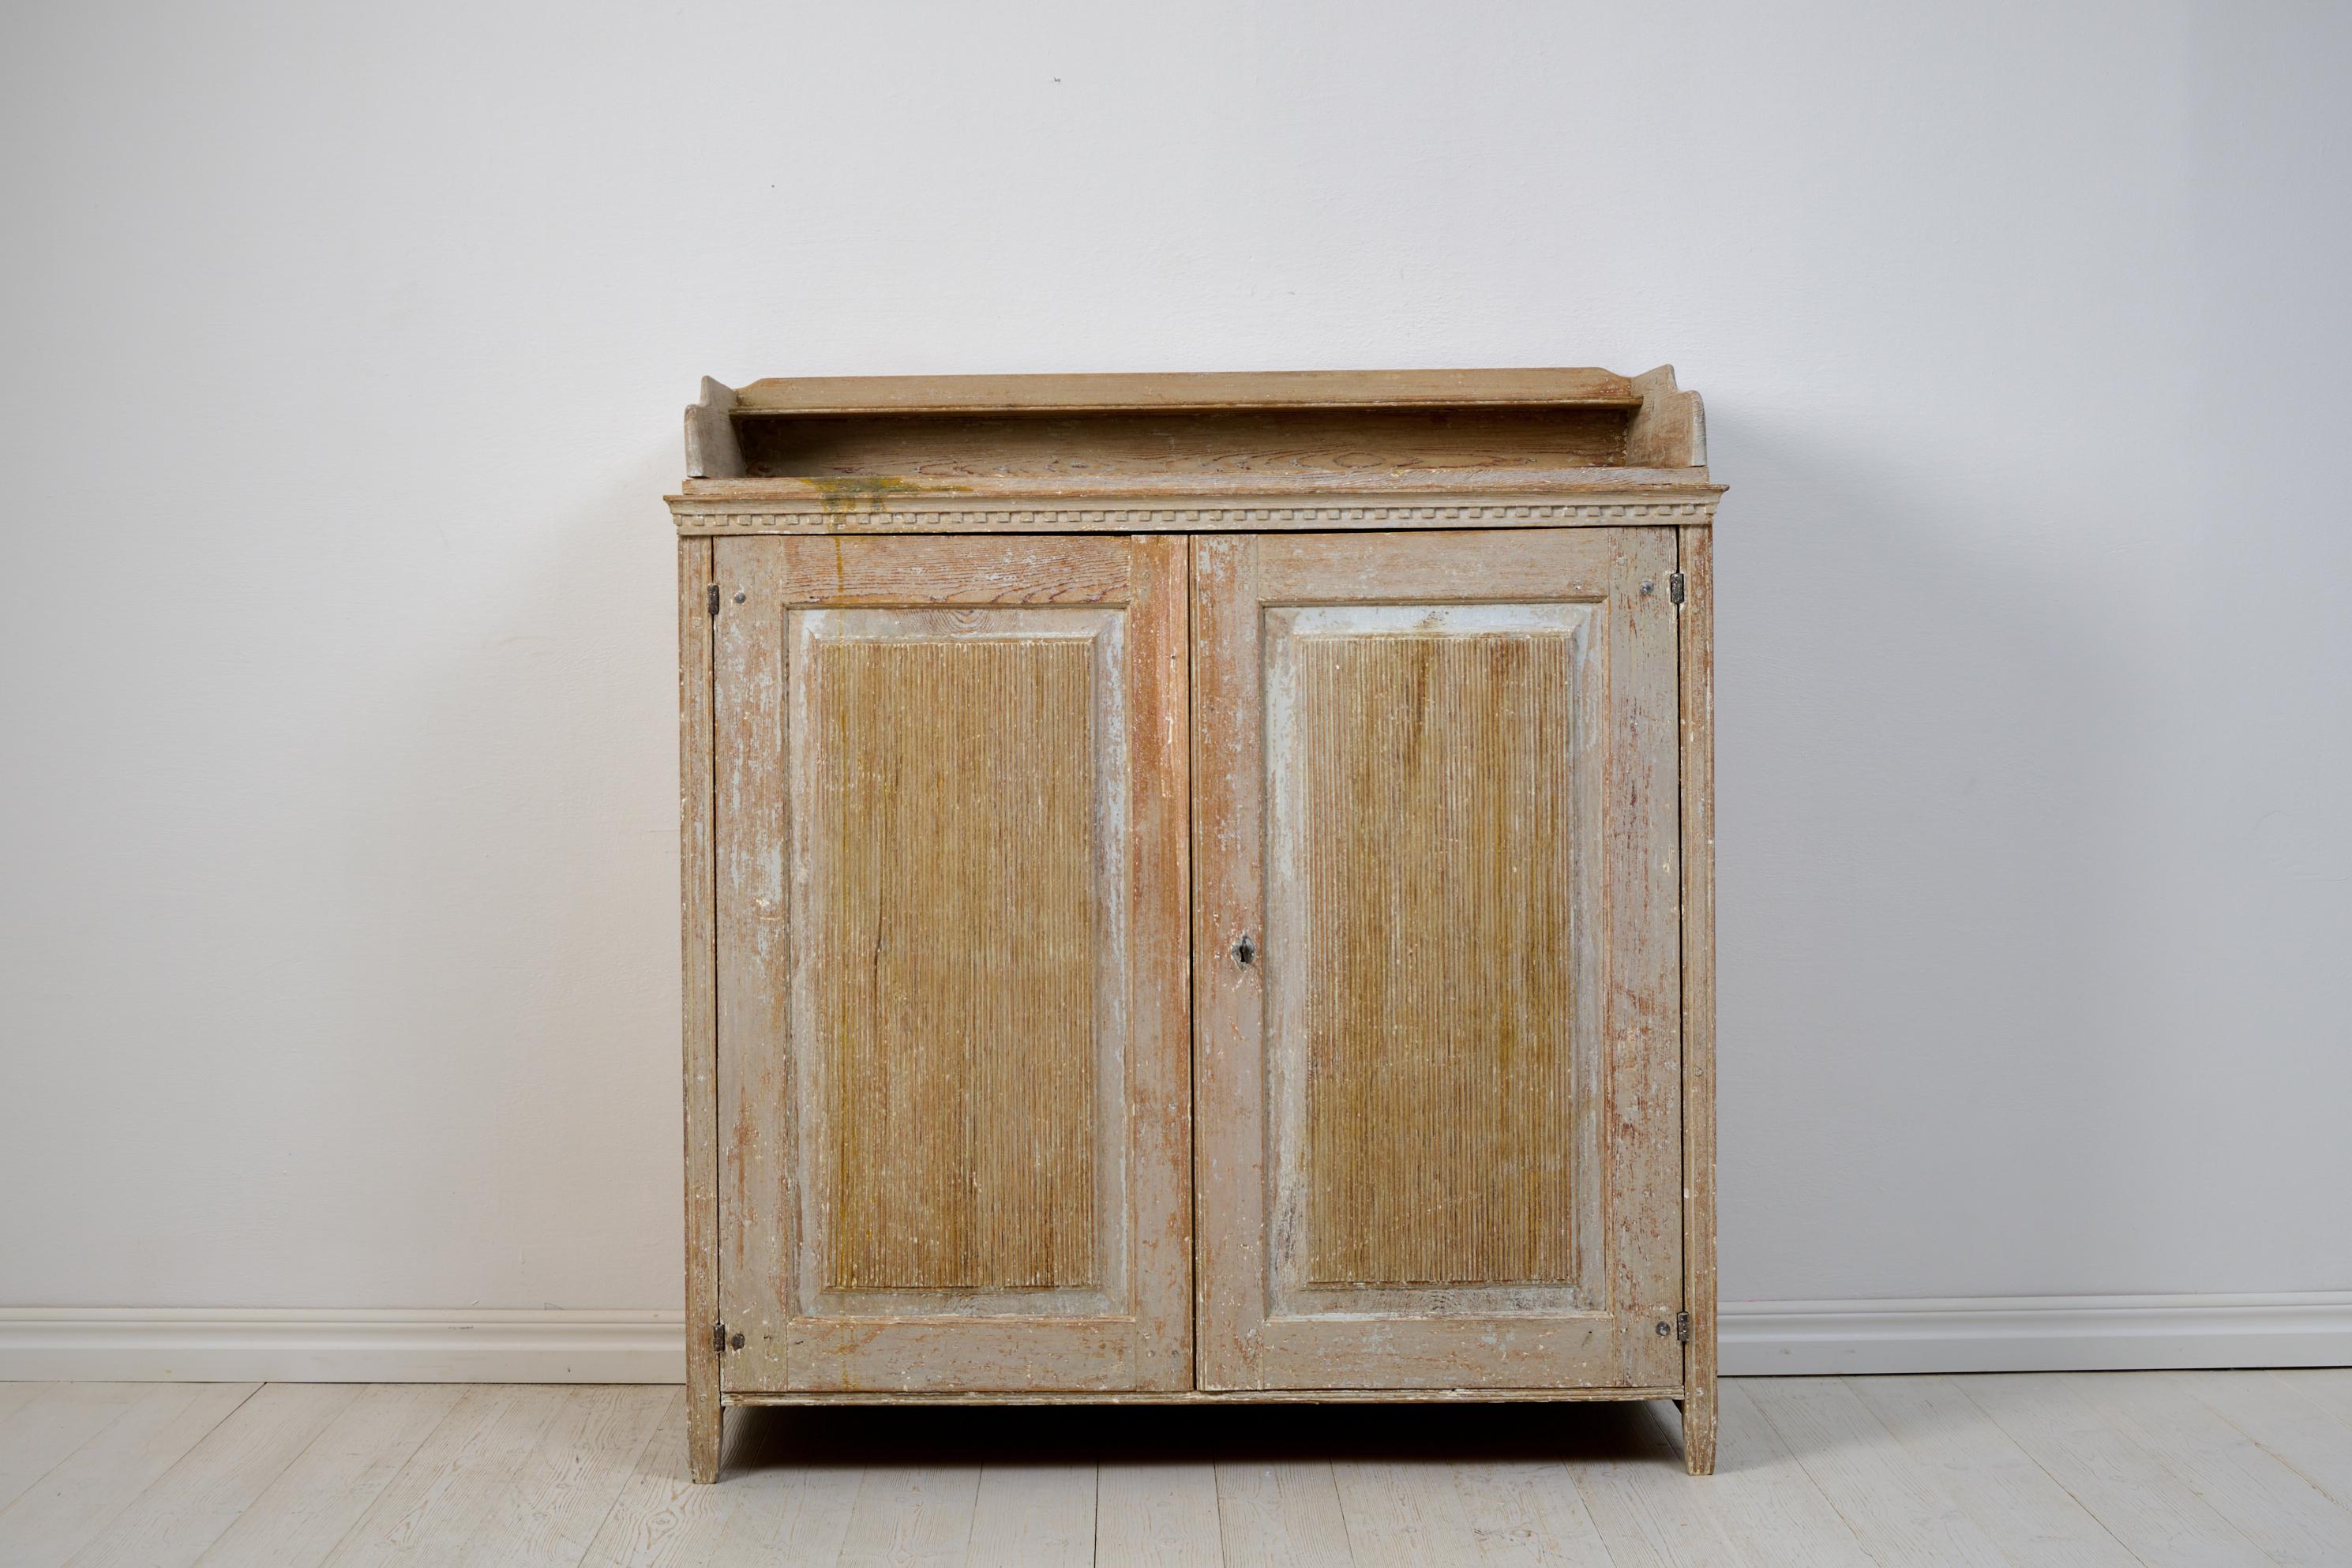 Large genuine Gustavian sideboard from Northern Sweden, made around 1810. The sideboard is crafted from solid pine and scraped by hand down to the original paint. It is adorned with carved wooden decor, and an unusual detail is that the short ends